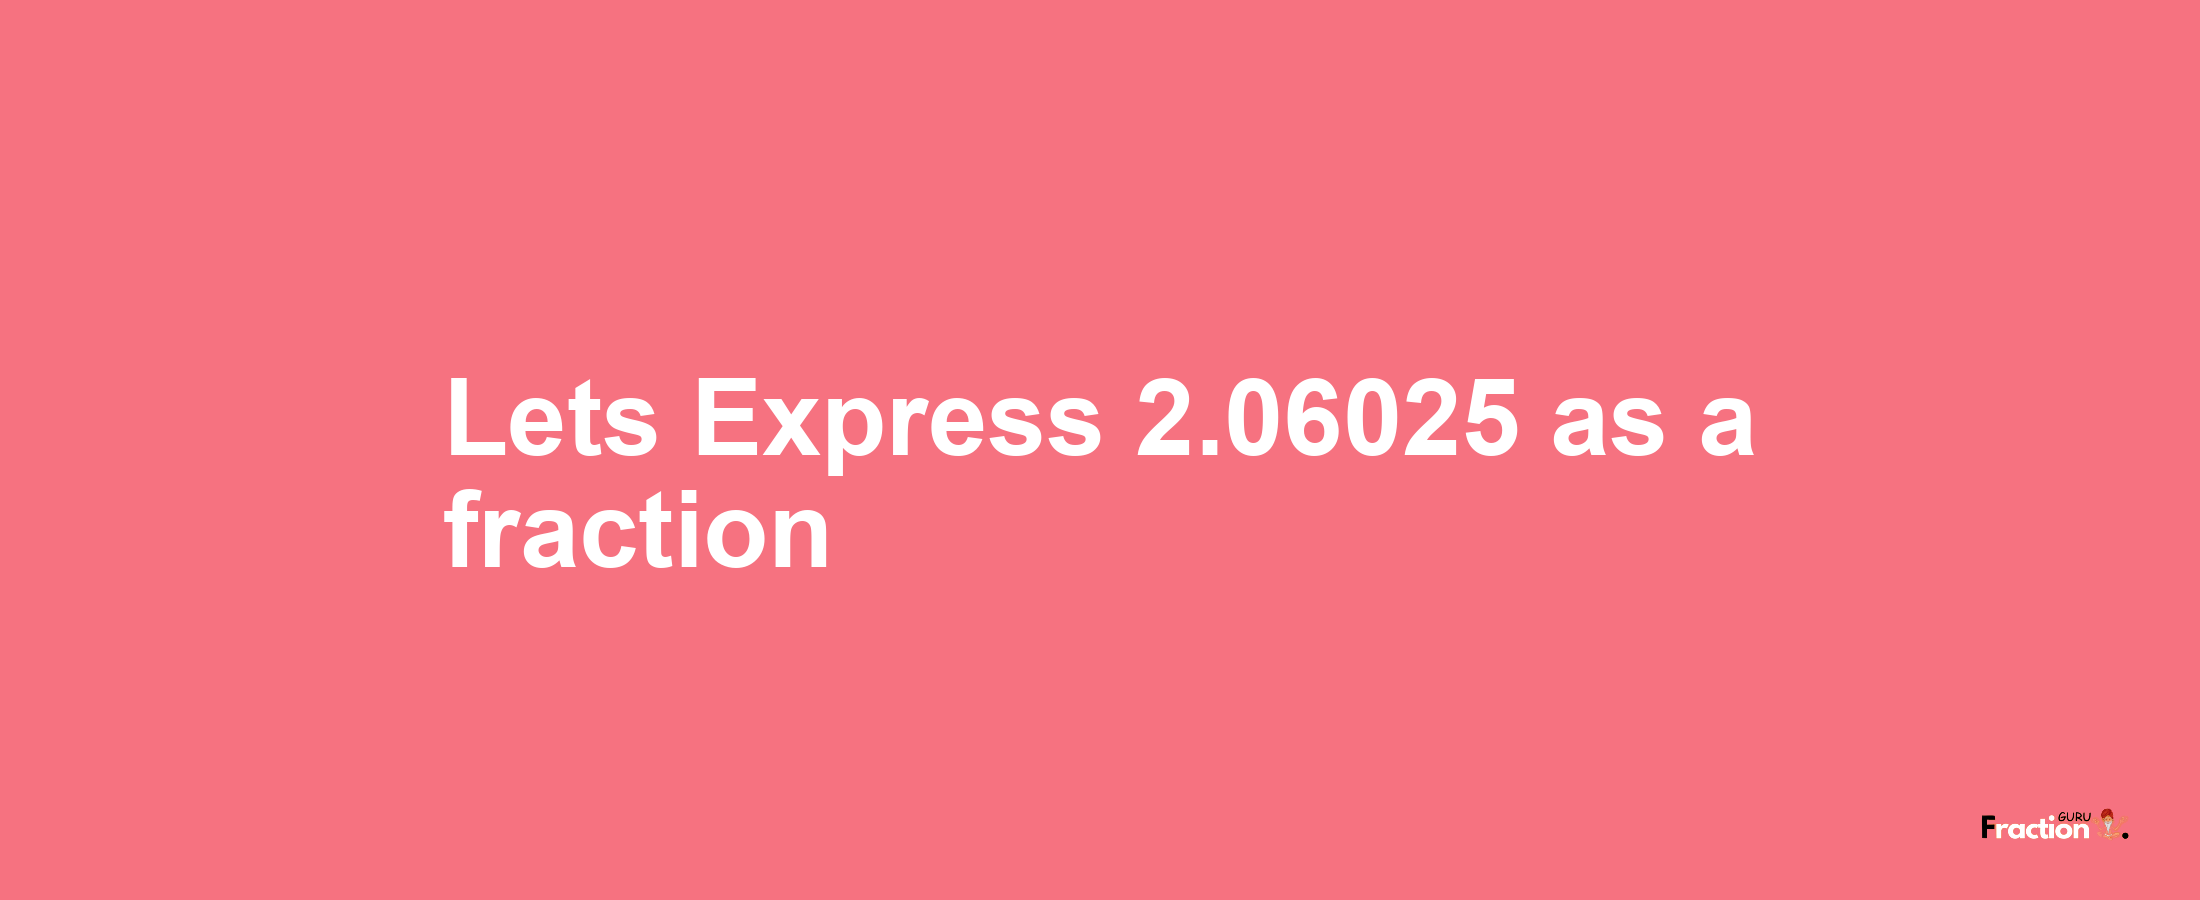 Lets Express 2.06025 as afraction